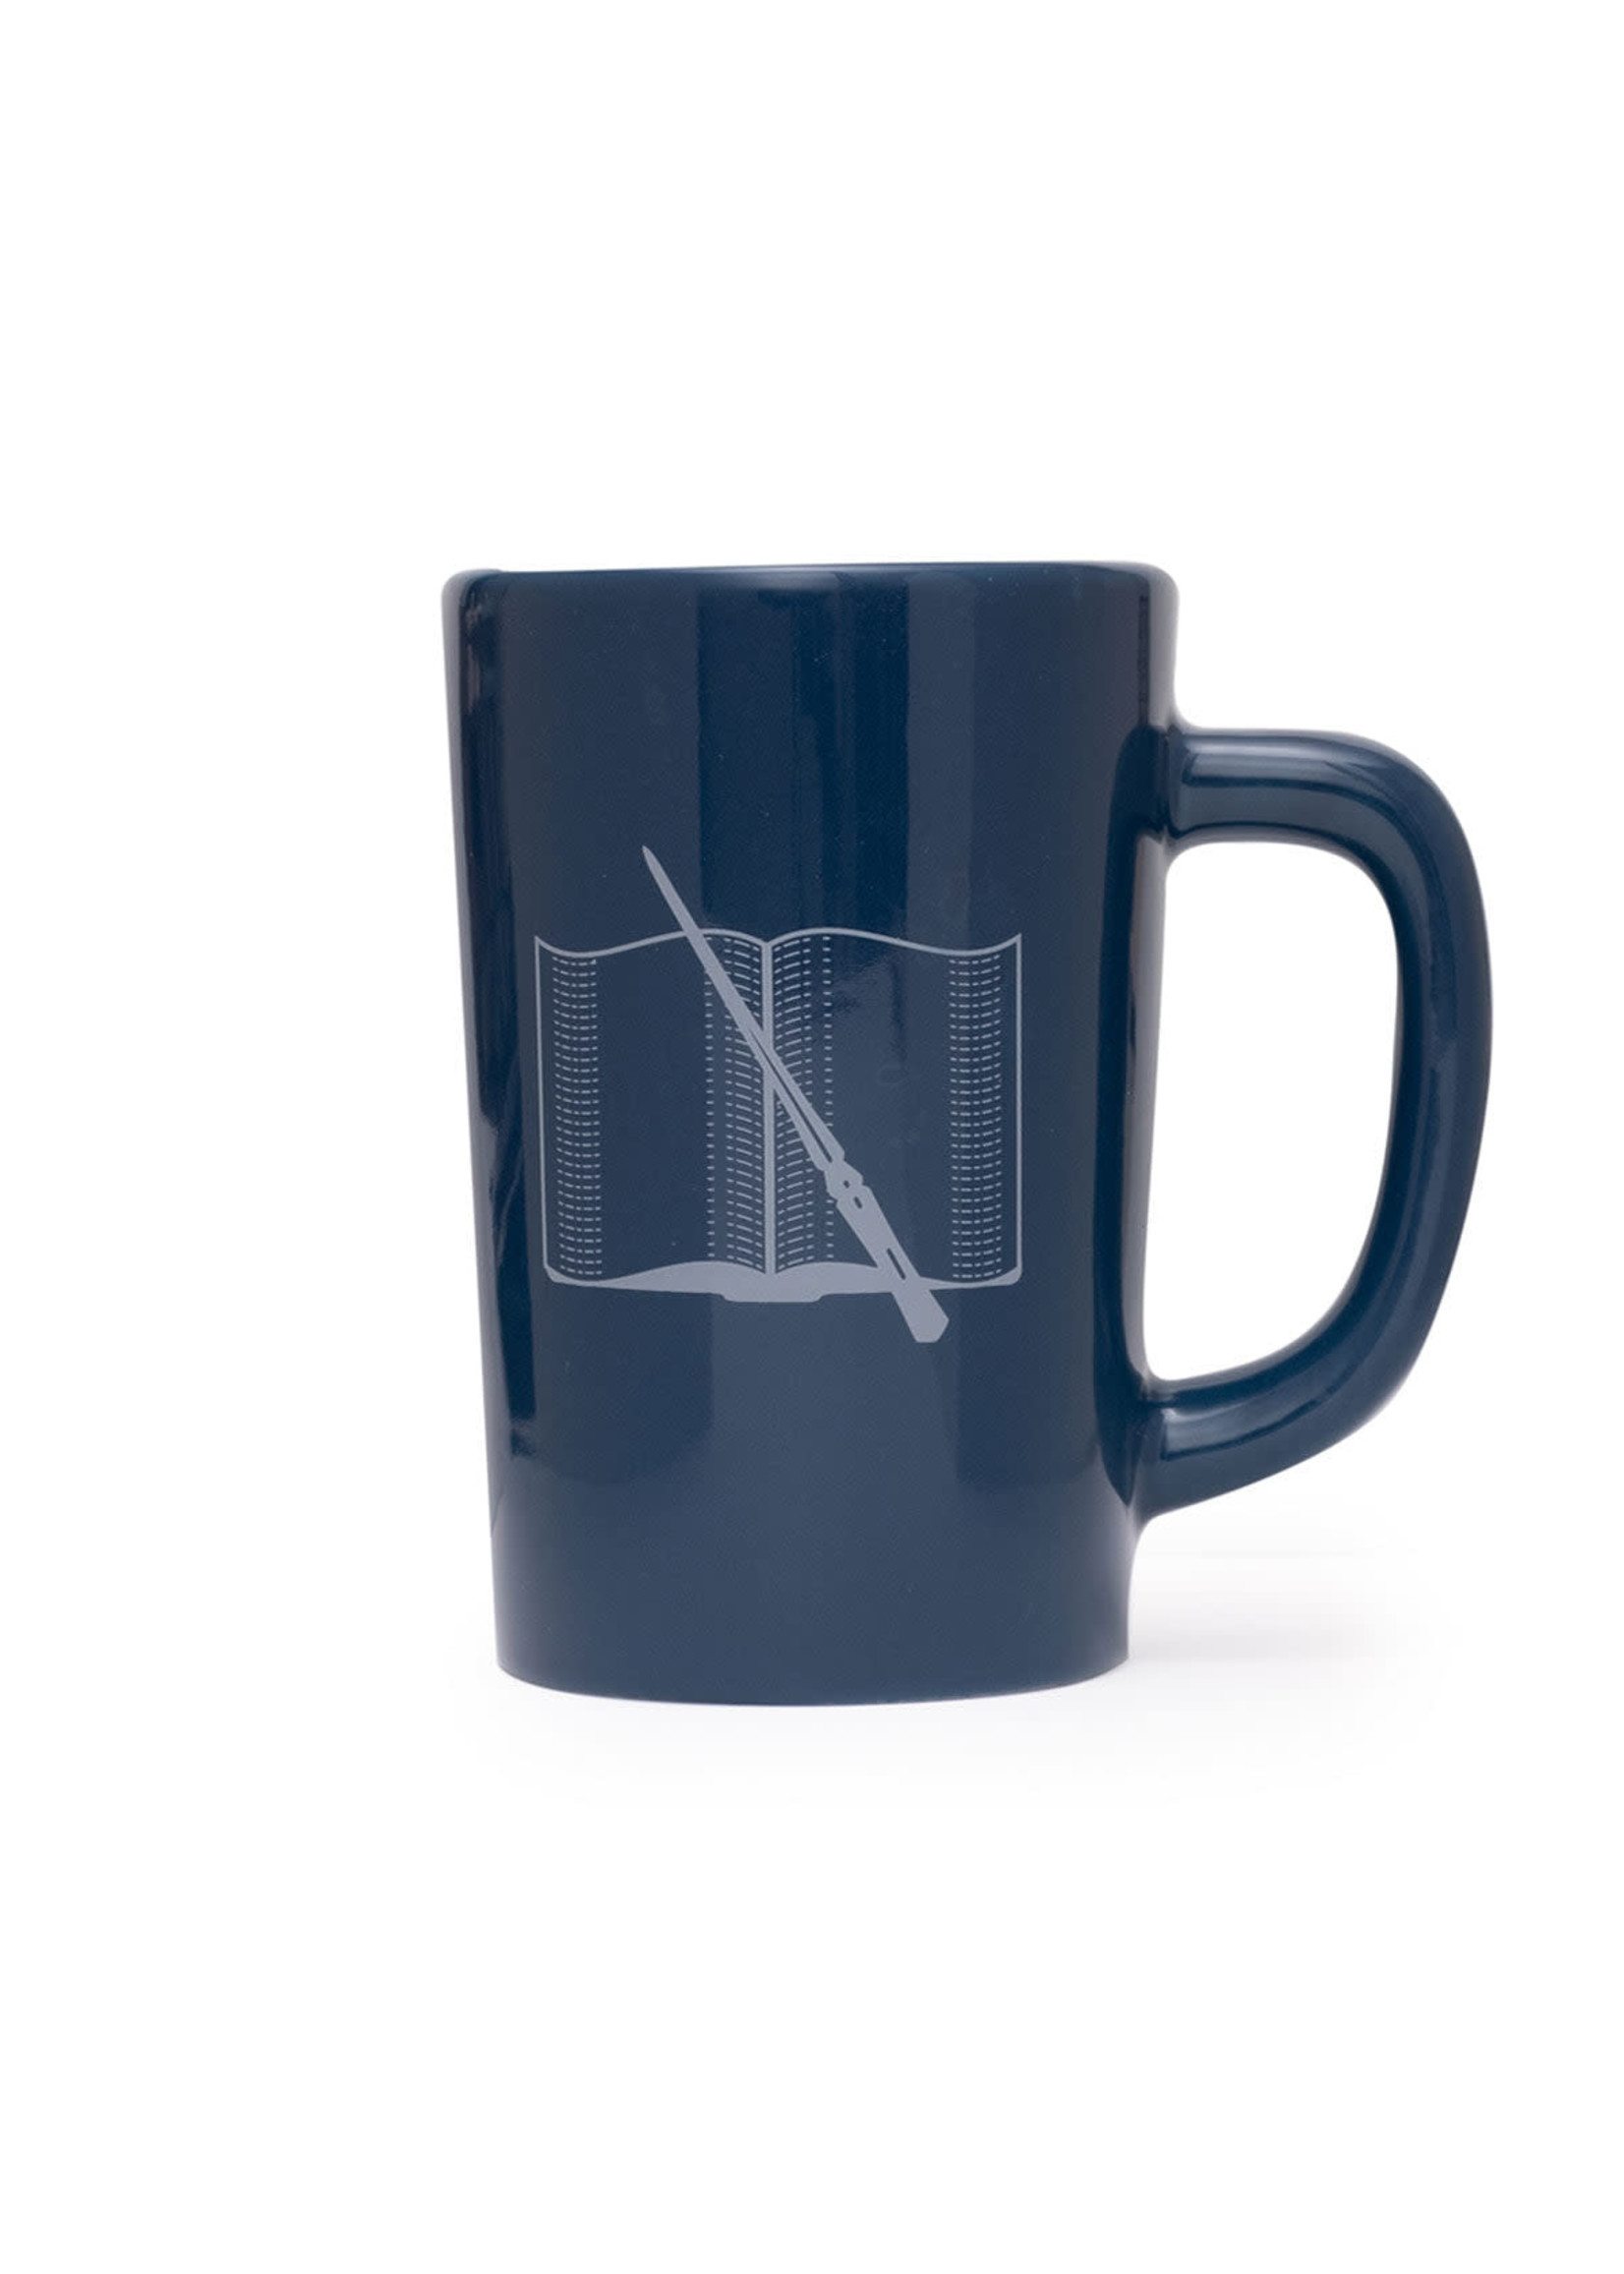 Out of Print Mug Books Turn Muggles Into Wizards